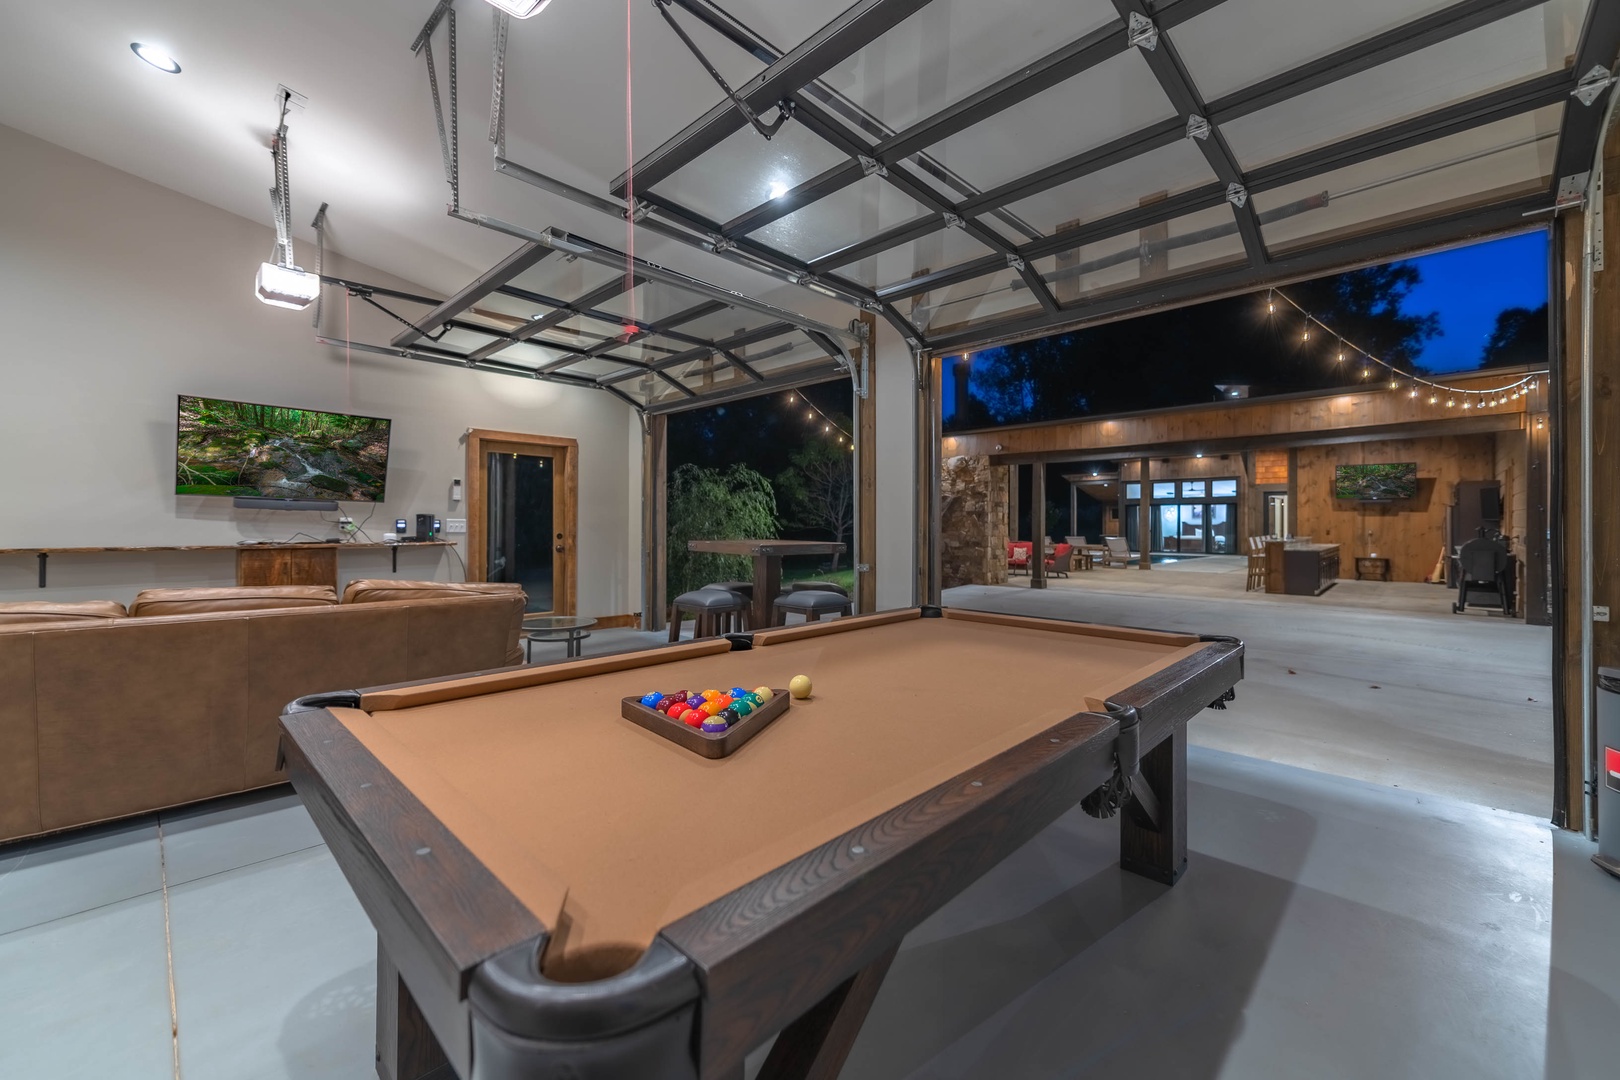 Cohutta Mountain Retreat- Garage game room with a pool table